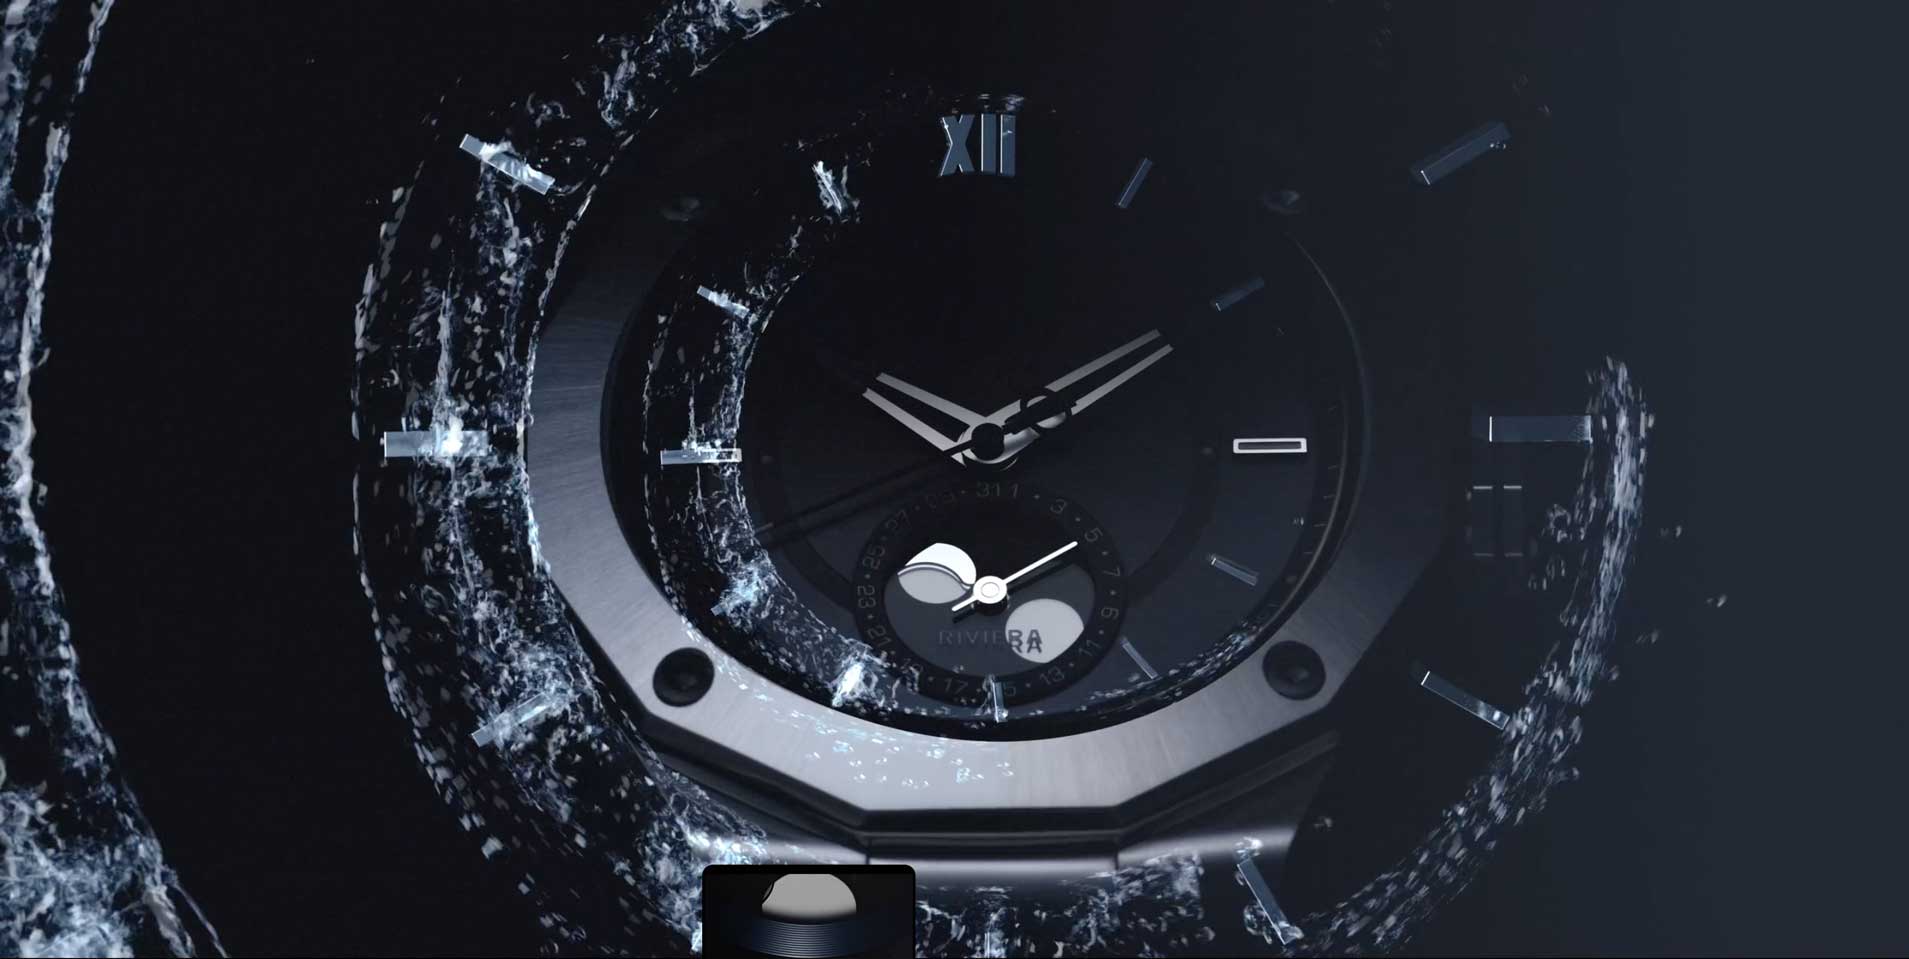 Baume and Mercier Riviera Moon Phase Product Film by I-reel | STASH MAGAZINE